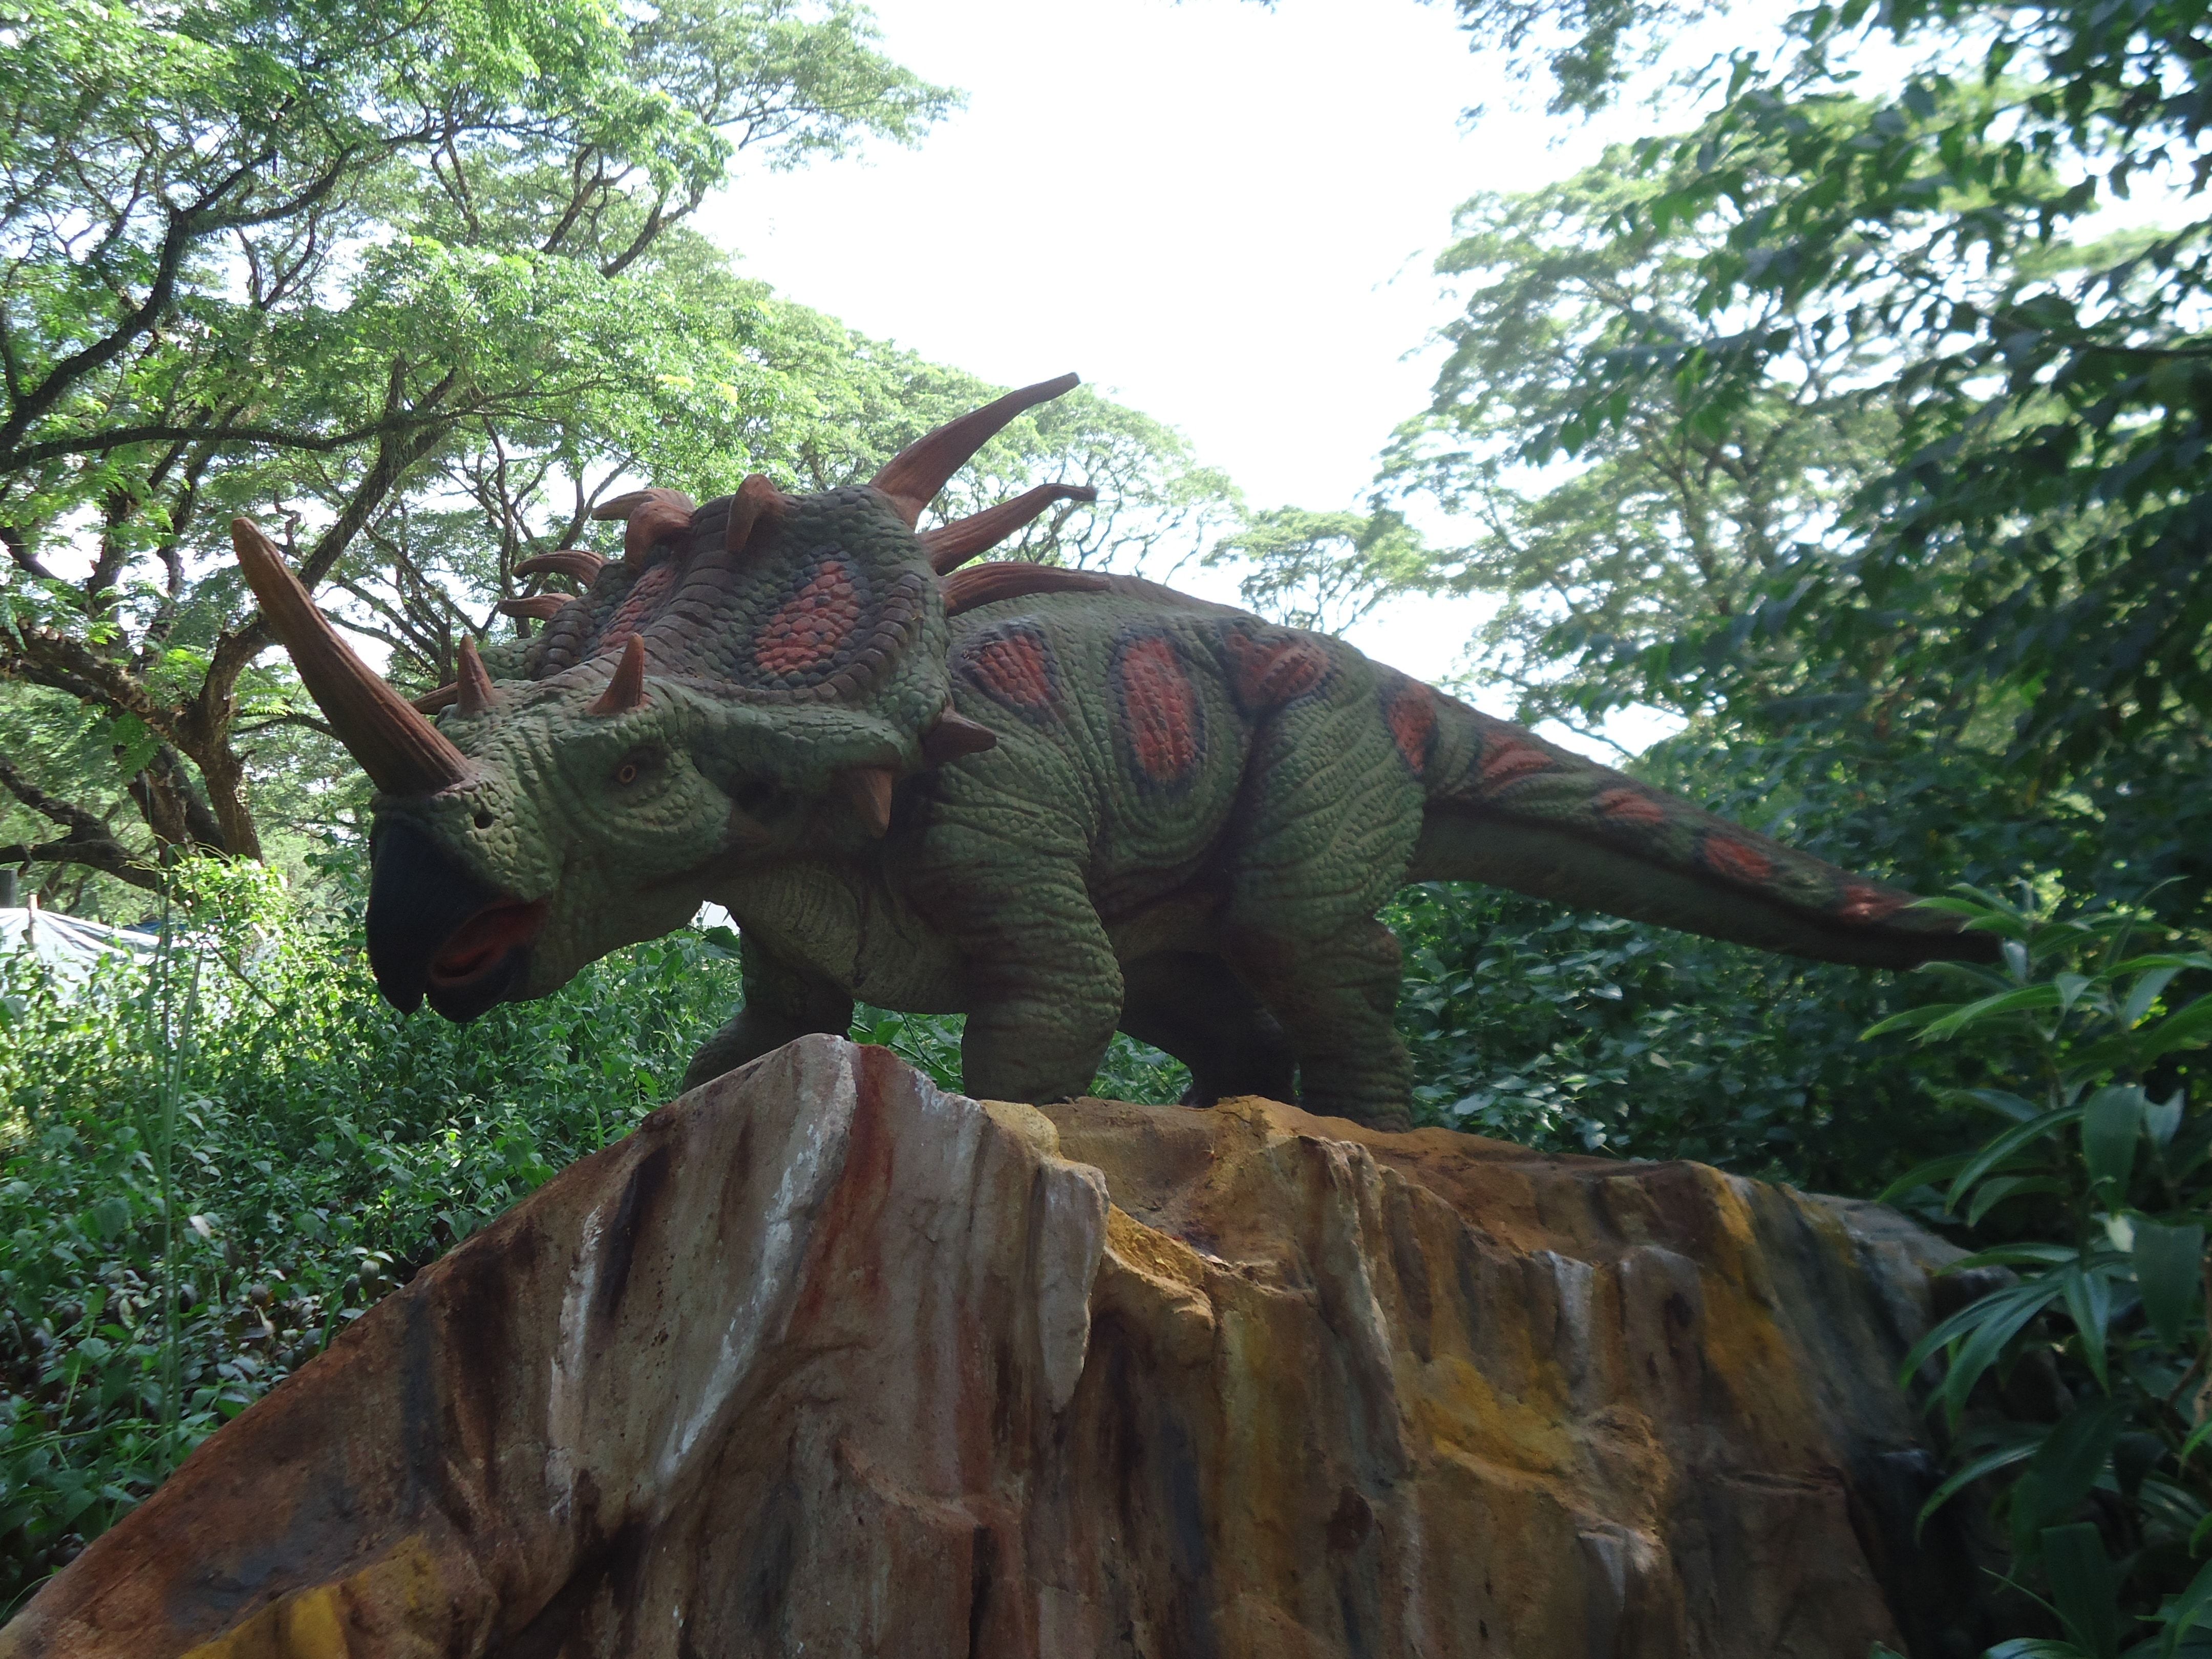 green and red triceratops statue free image